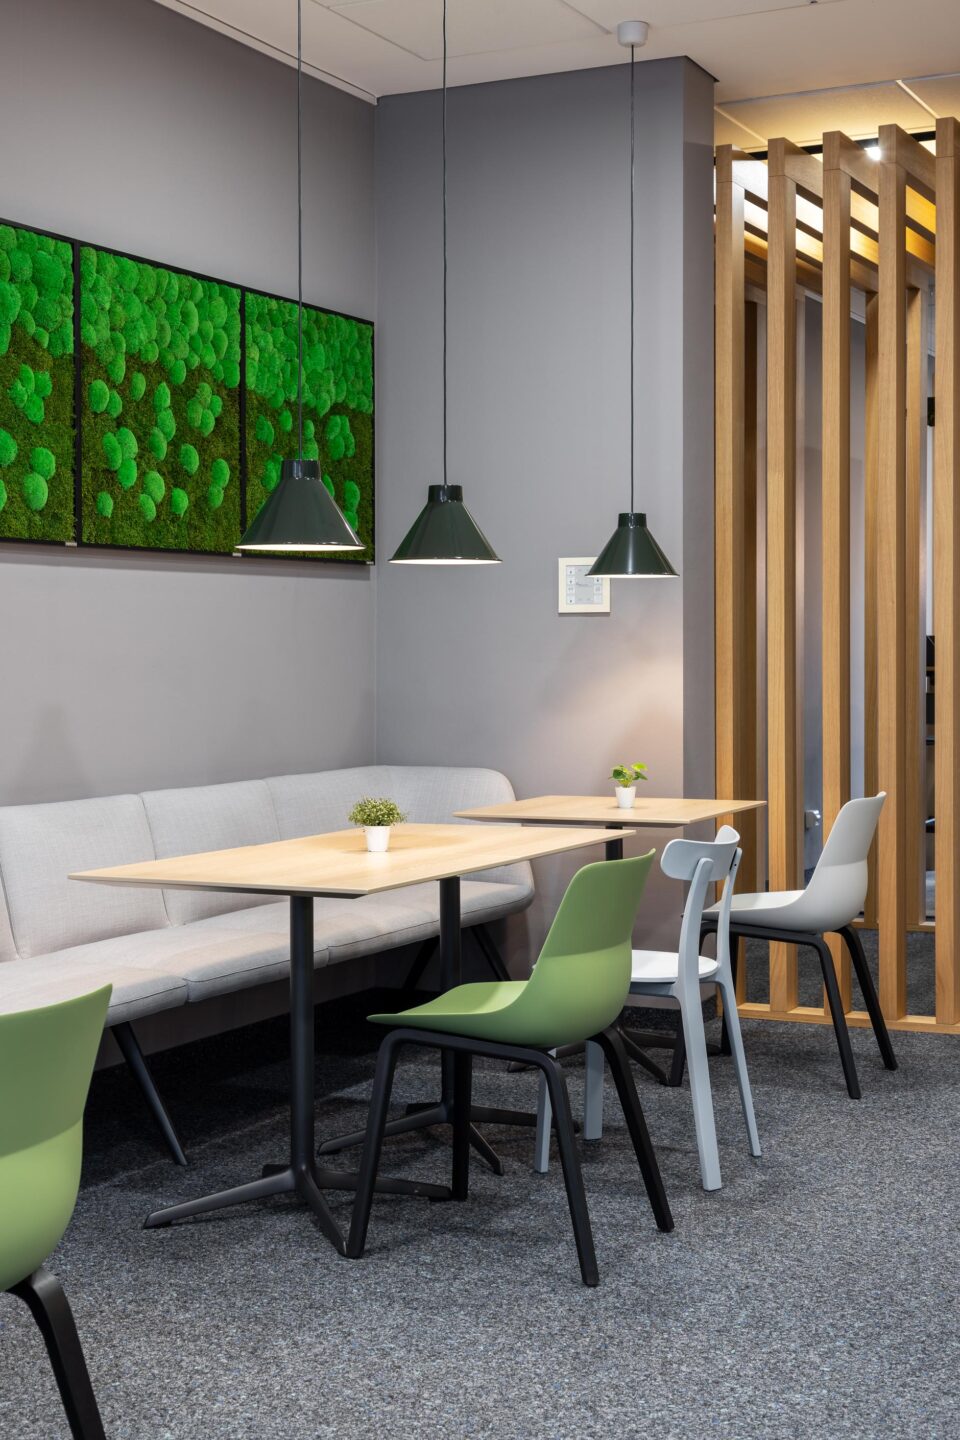 Workcafé FIZ Karlsruhe | wooden table tops and seating in green and grey